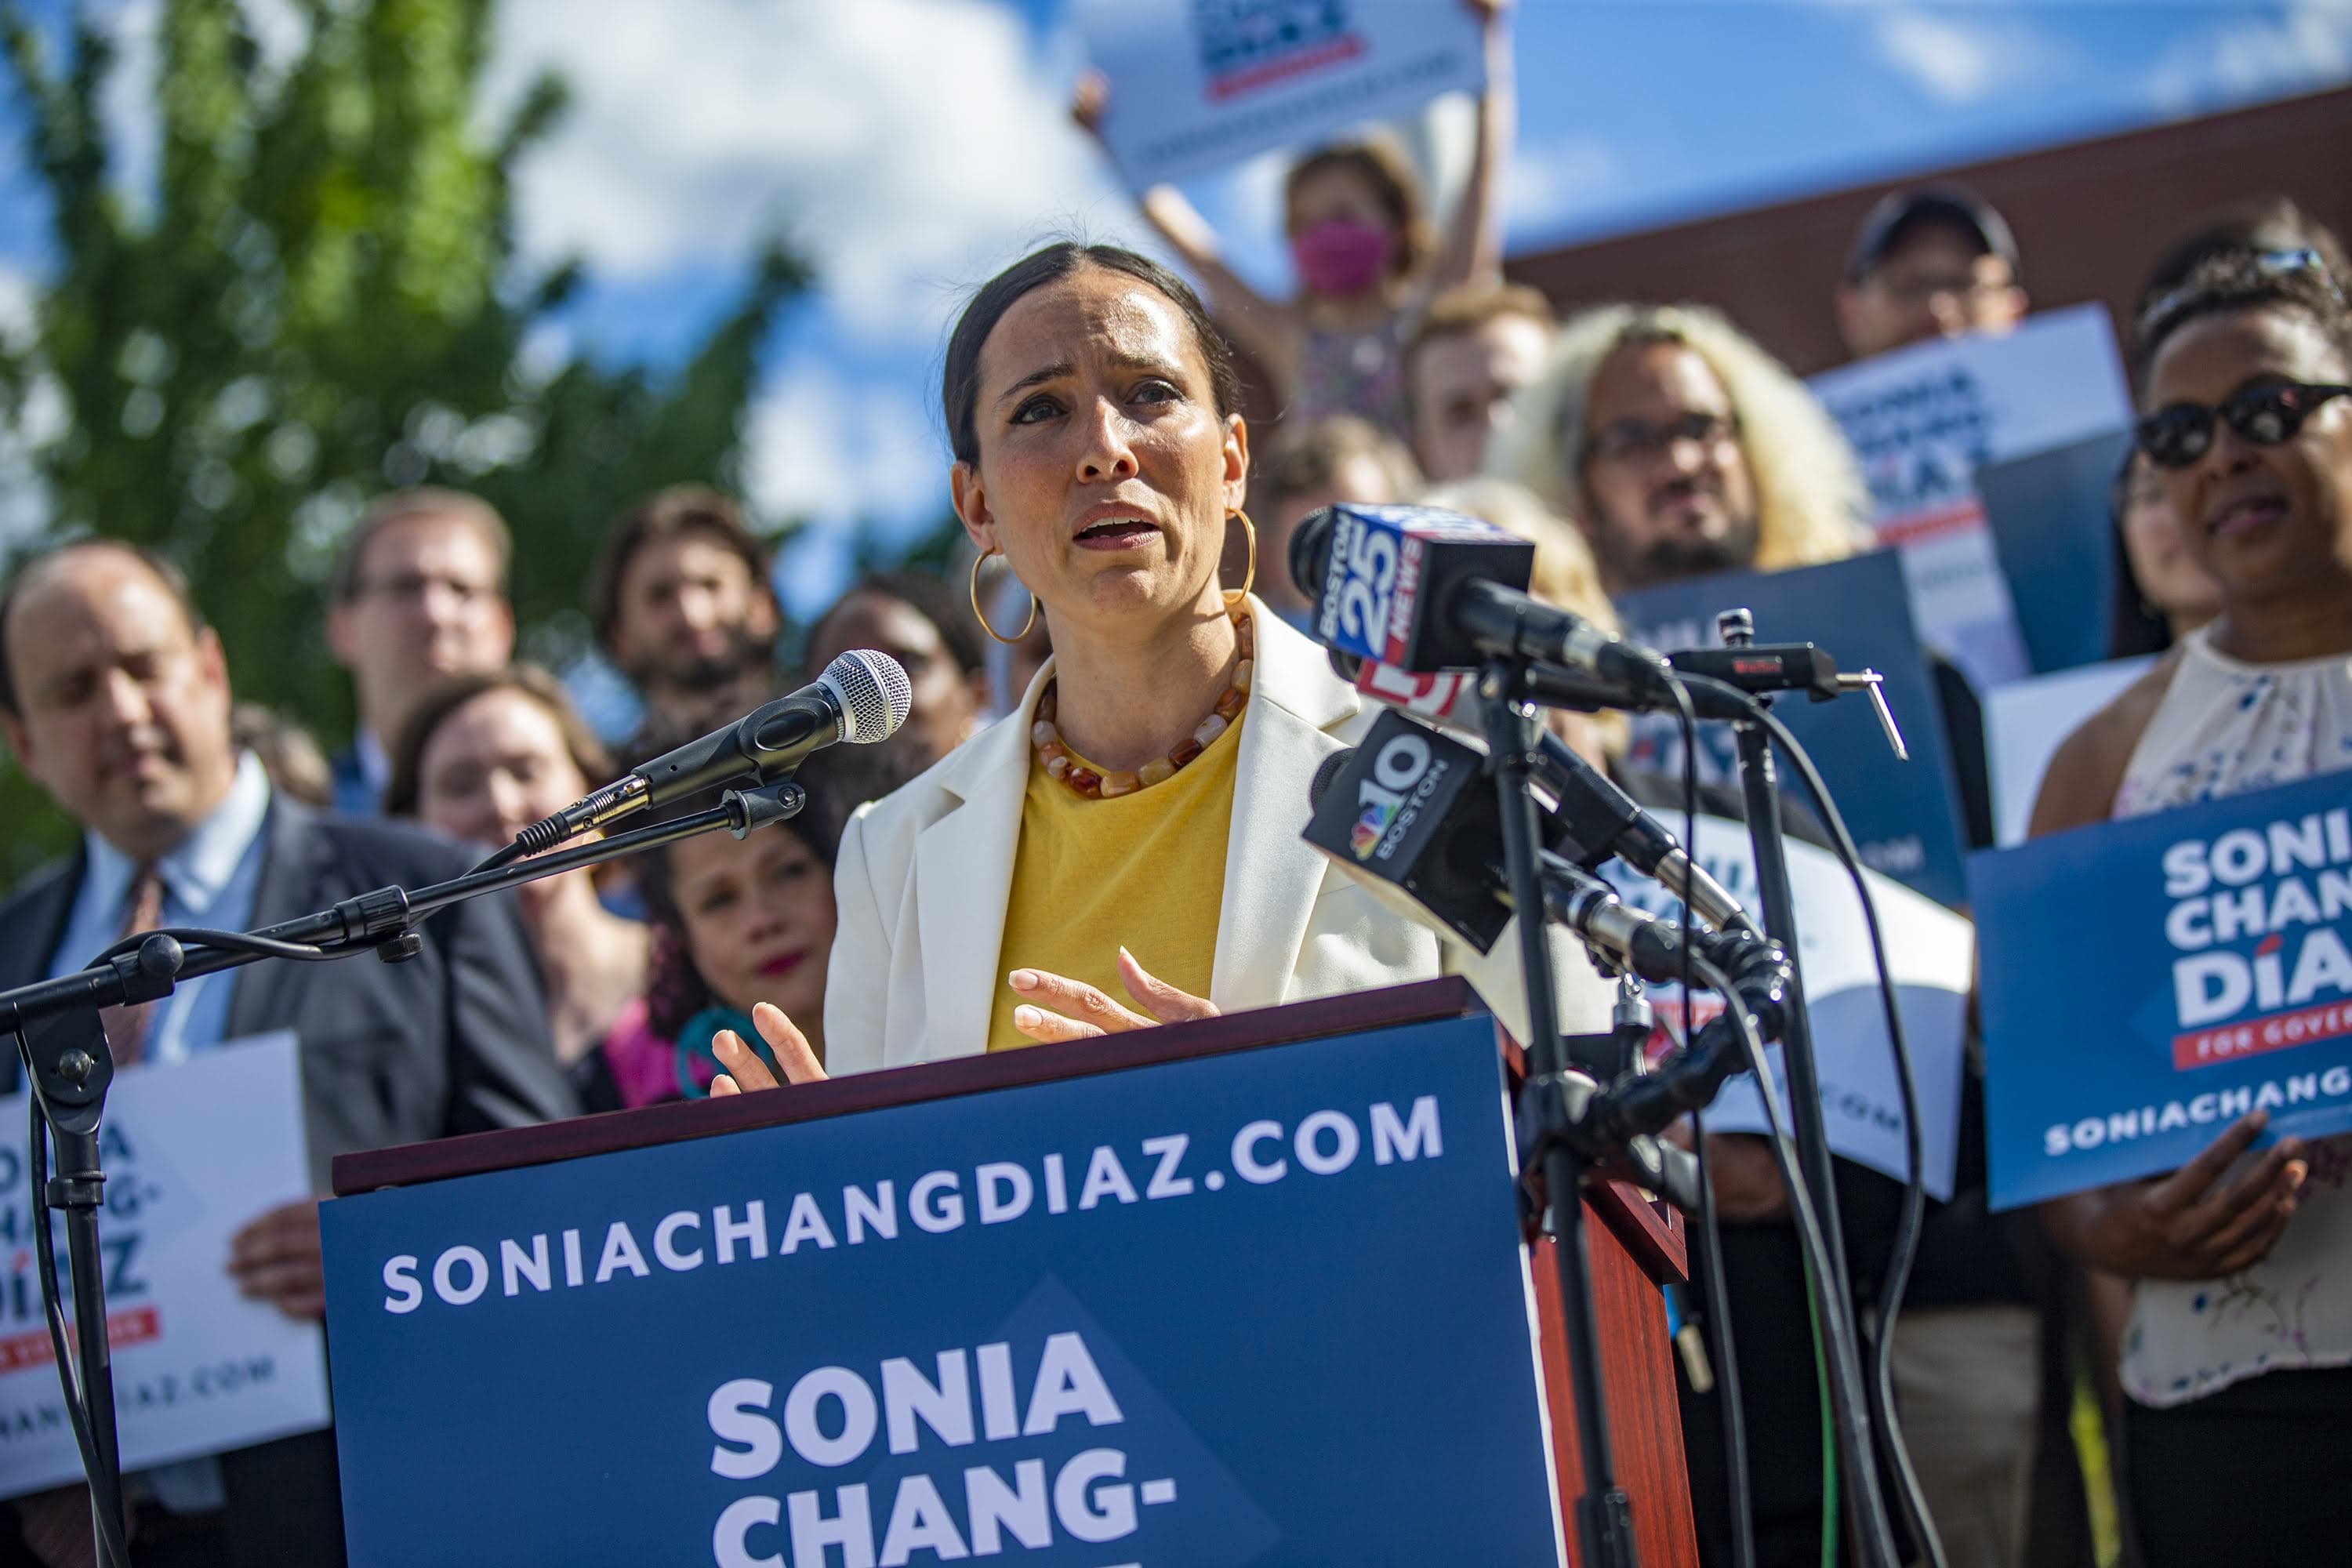 Sonia Chang-Díaz announces her candidacy for governor at a campaign event at Boston English High School in Jamaica Plain. (Jesse Costa/WBUR)